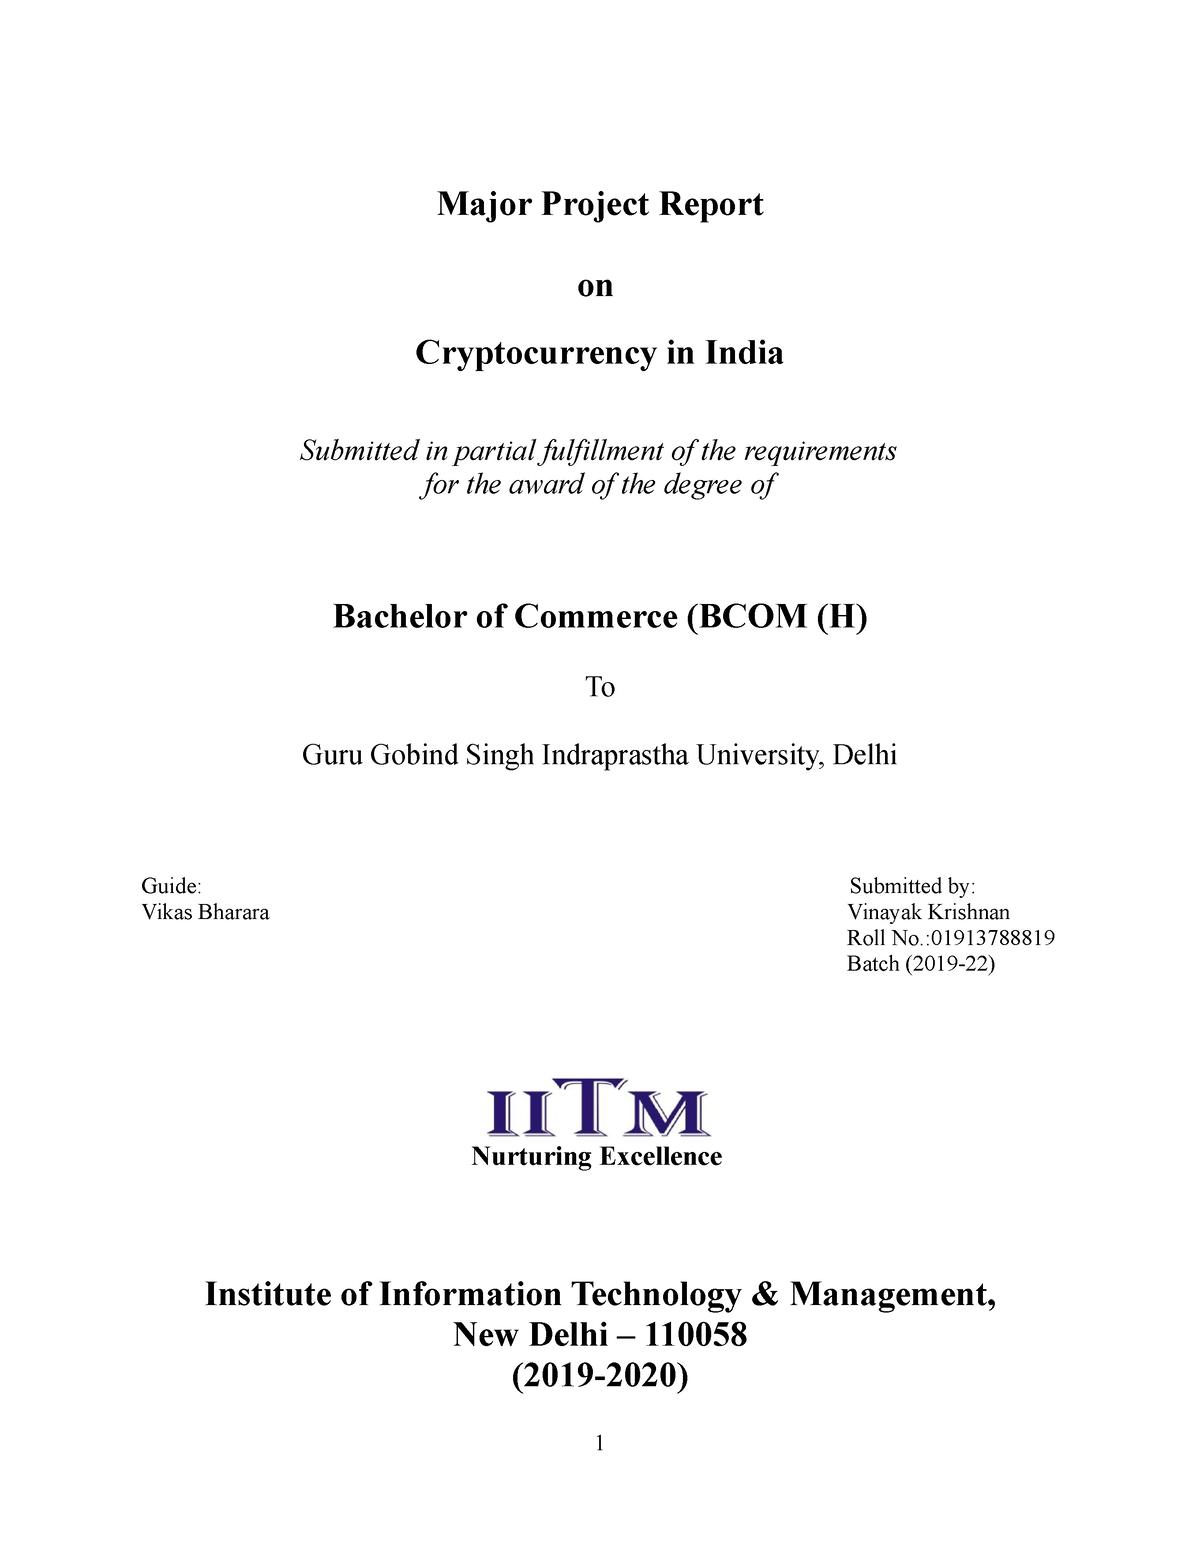 research paper on cryptocurrency